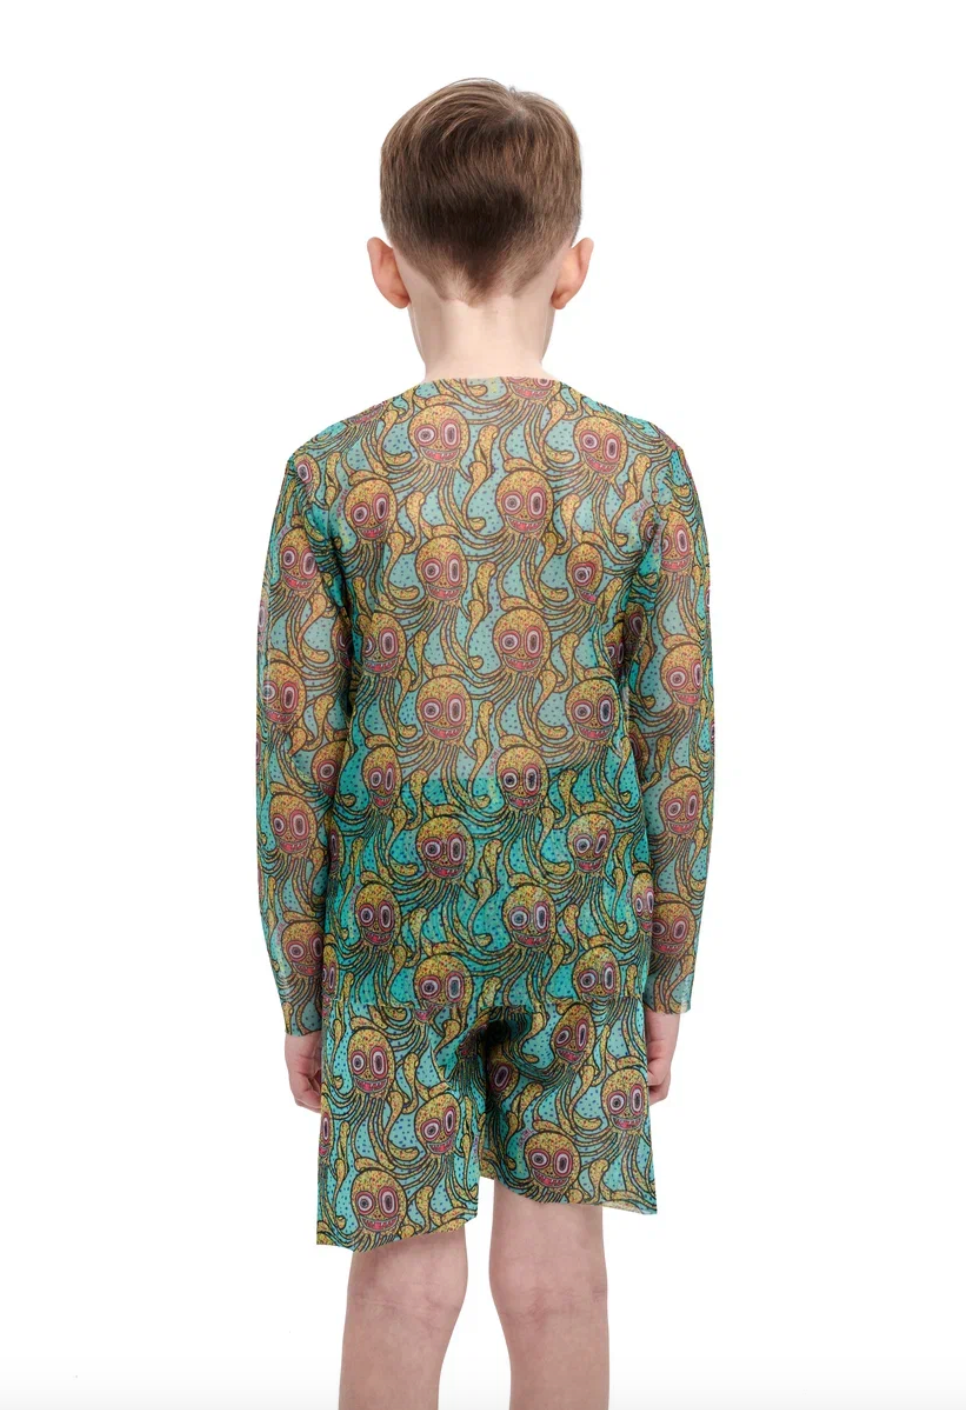 This file describes a tan-through, sustainable kid's T-shirt and shorts set with an Octopus print. It combines innovation and classic luxury for modest fashion. Shop now!